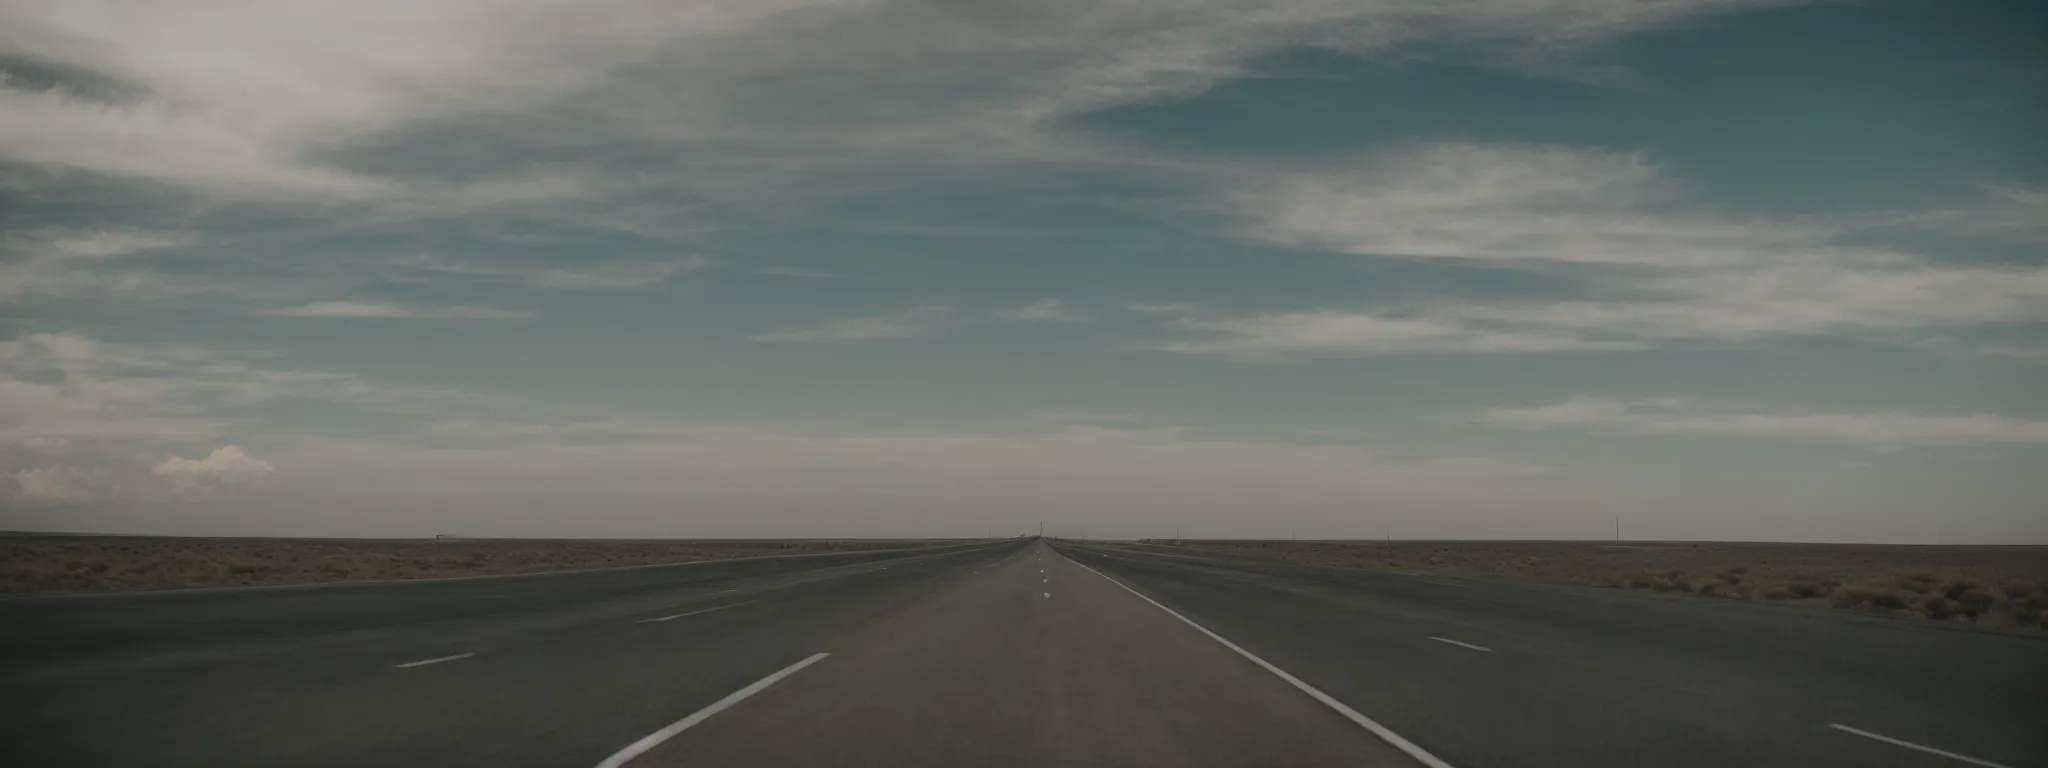 a deserted highway stretches into the horizon, silently challenging the belief that bustling roads equate to progress.